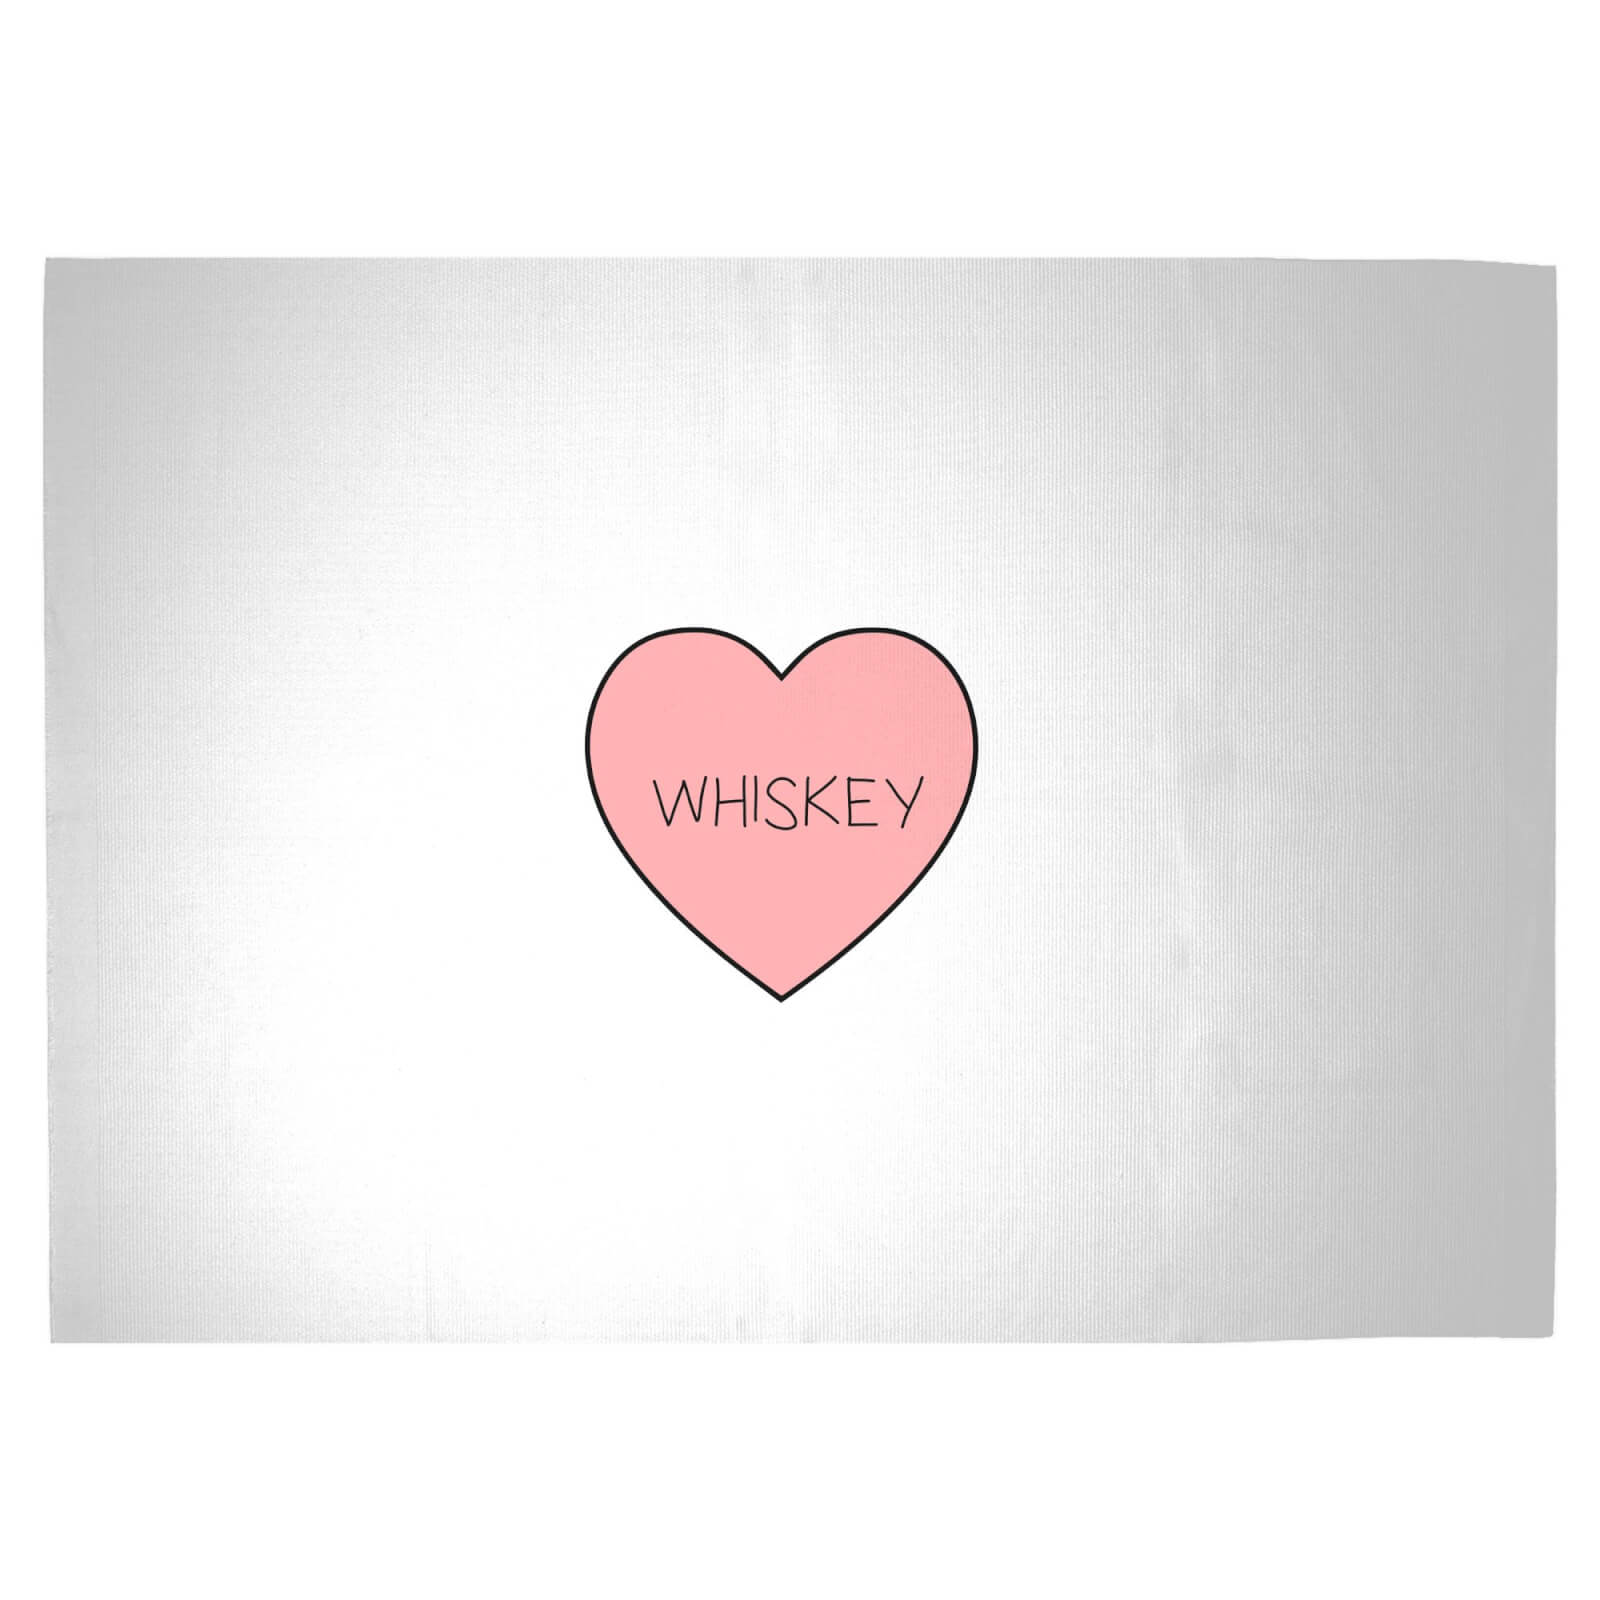 I Love Whiskey Woven Rug - Large